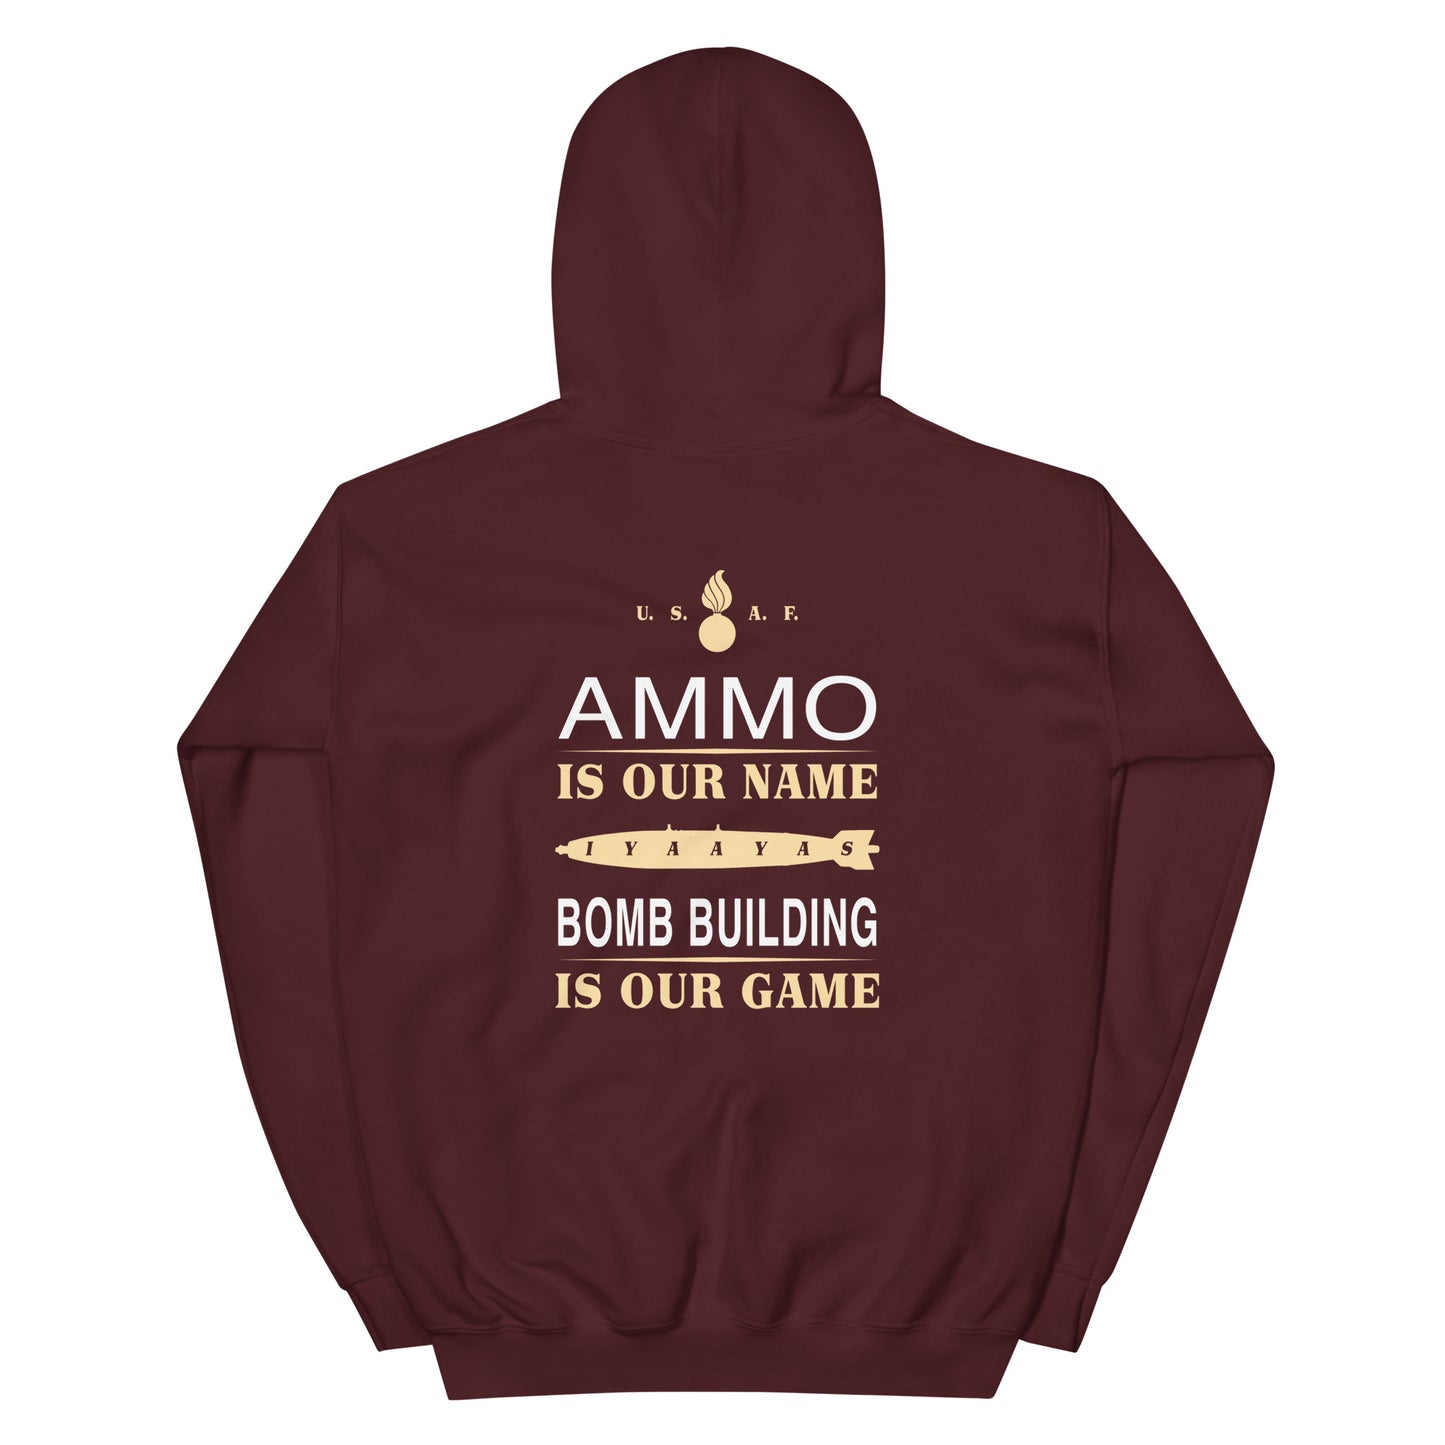 AMMO Is Our Name Bomb Building Is Our Game IYAAYAS Unisex Hoodie